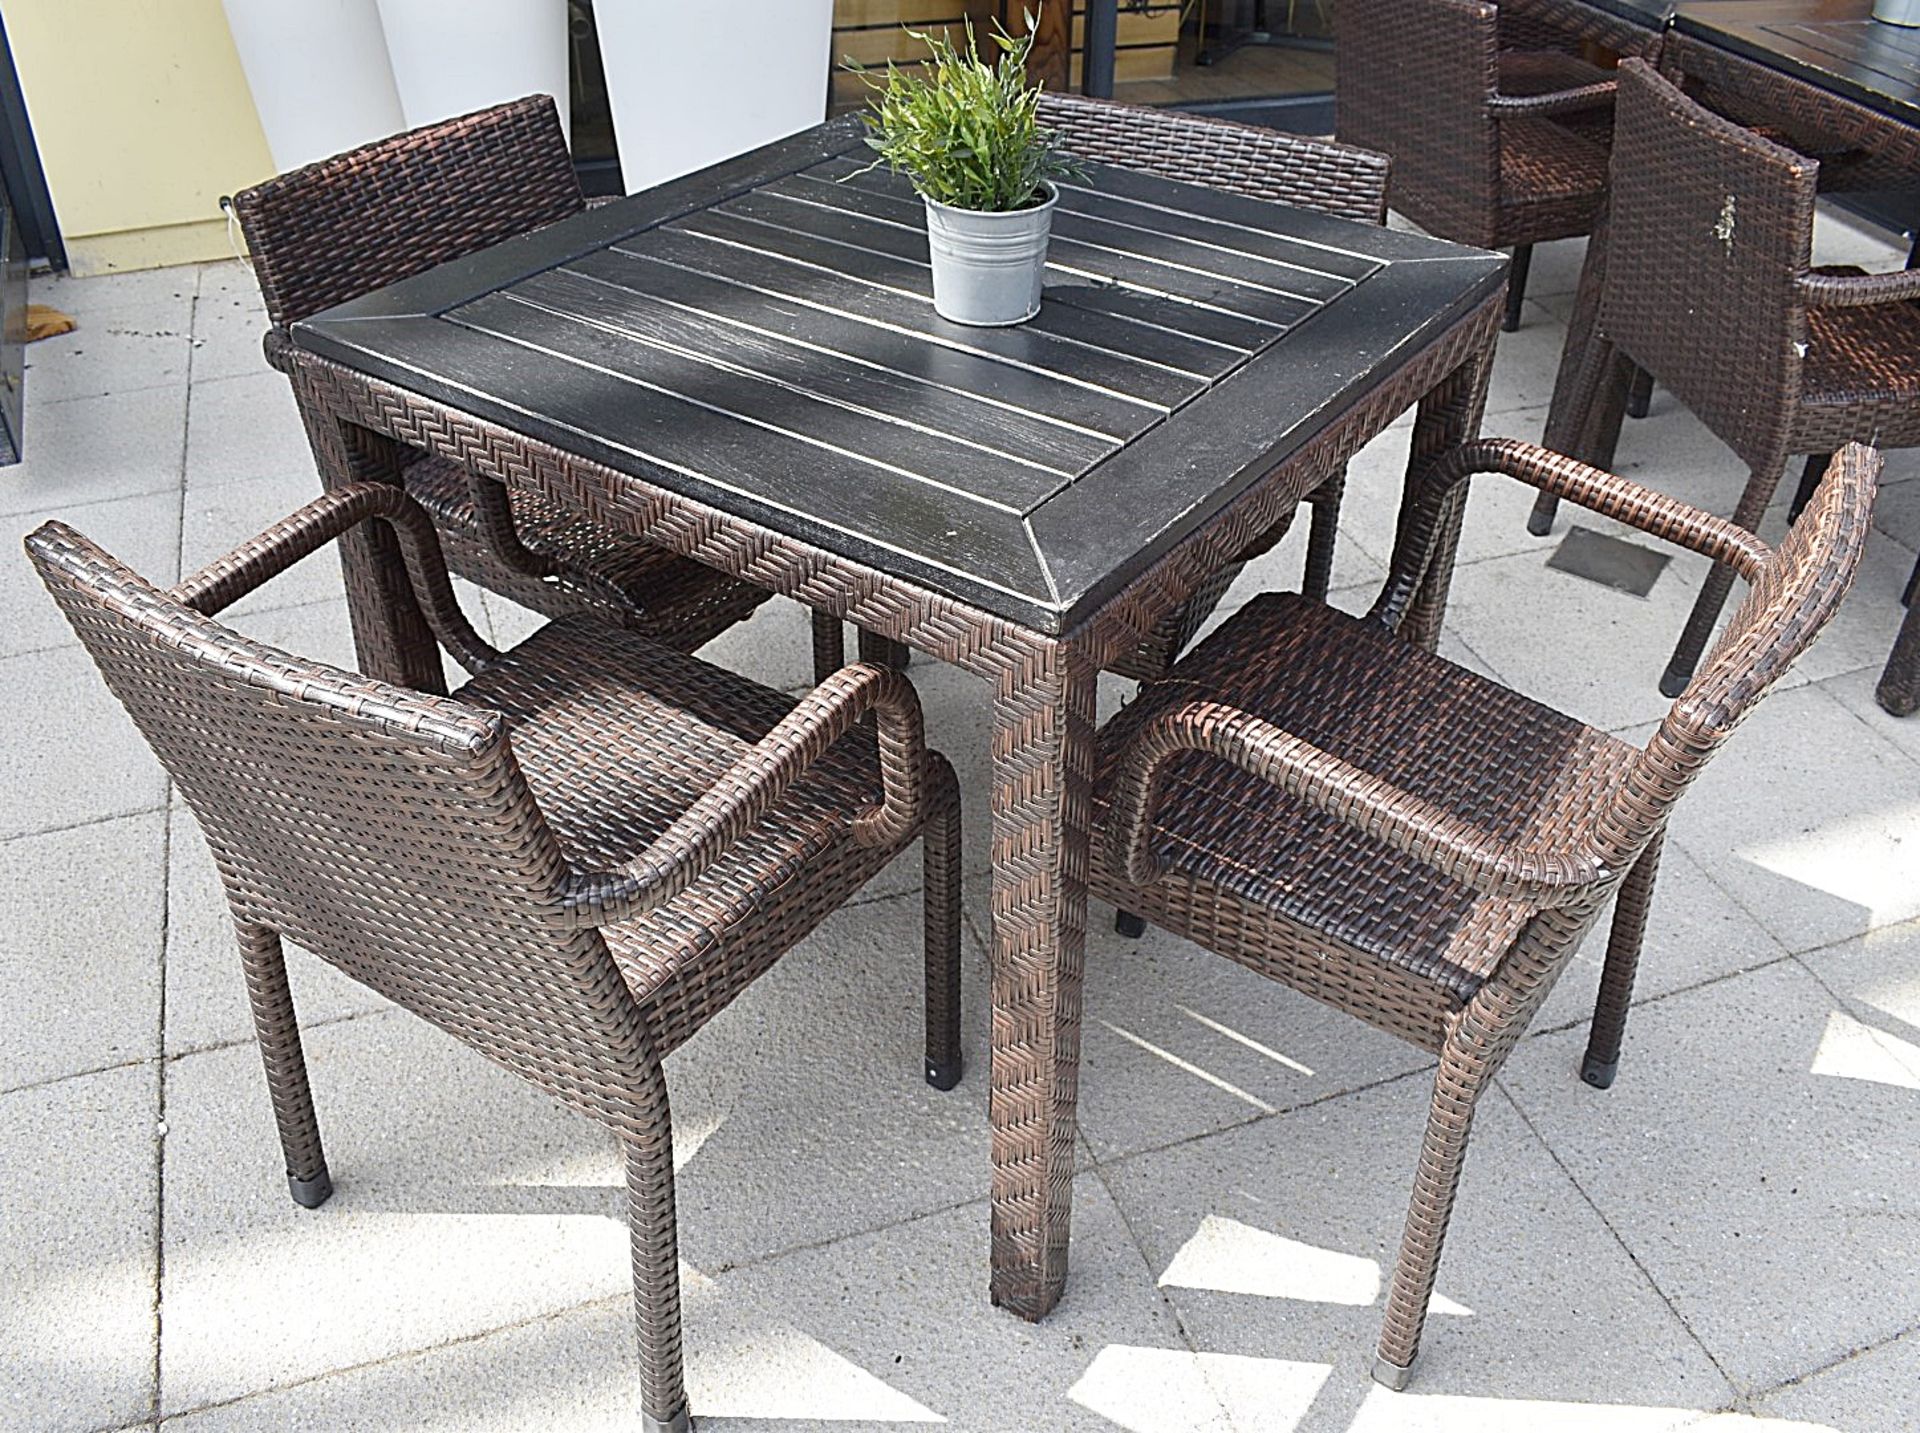 4 x Outdoor Rattan Garden Chairs With A Matching Square Table